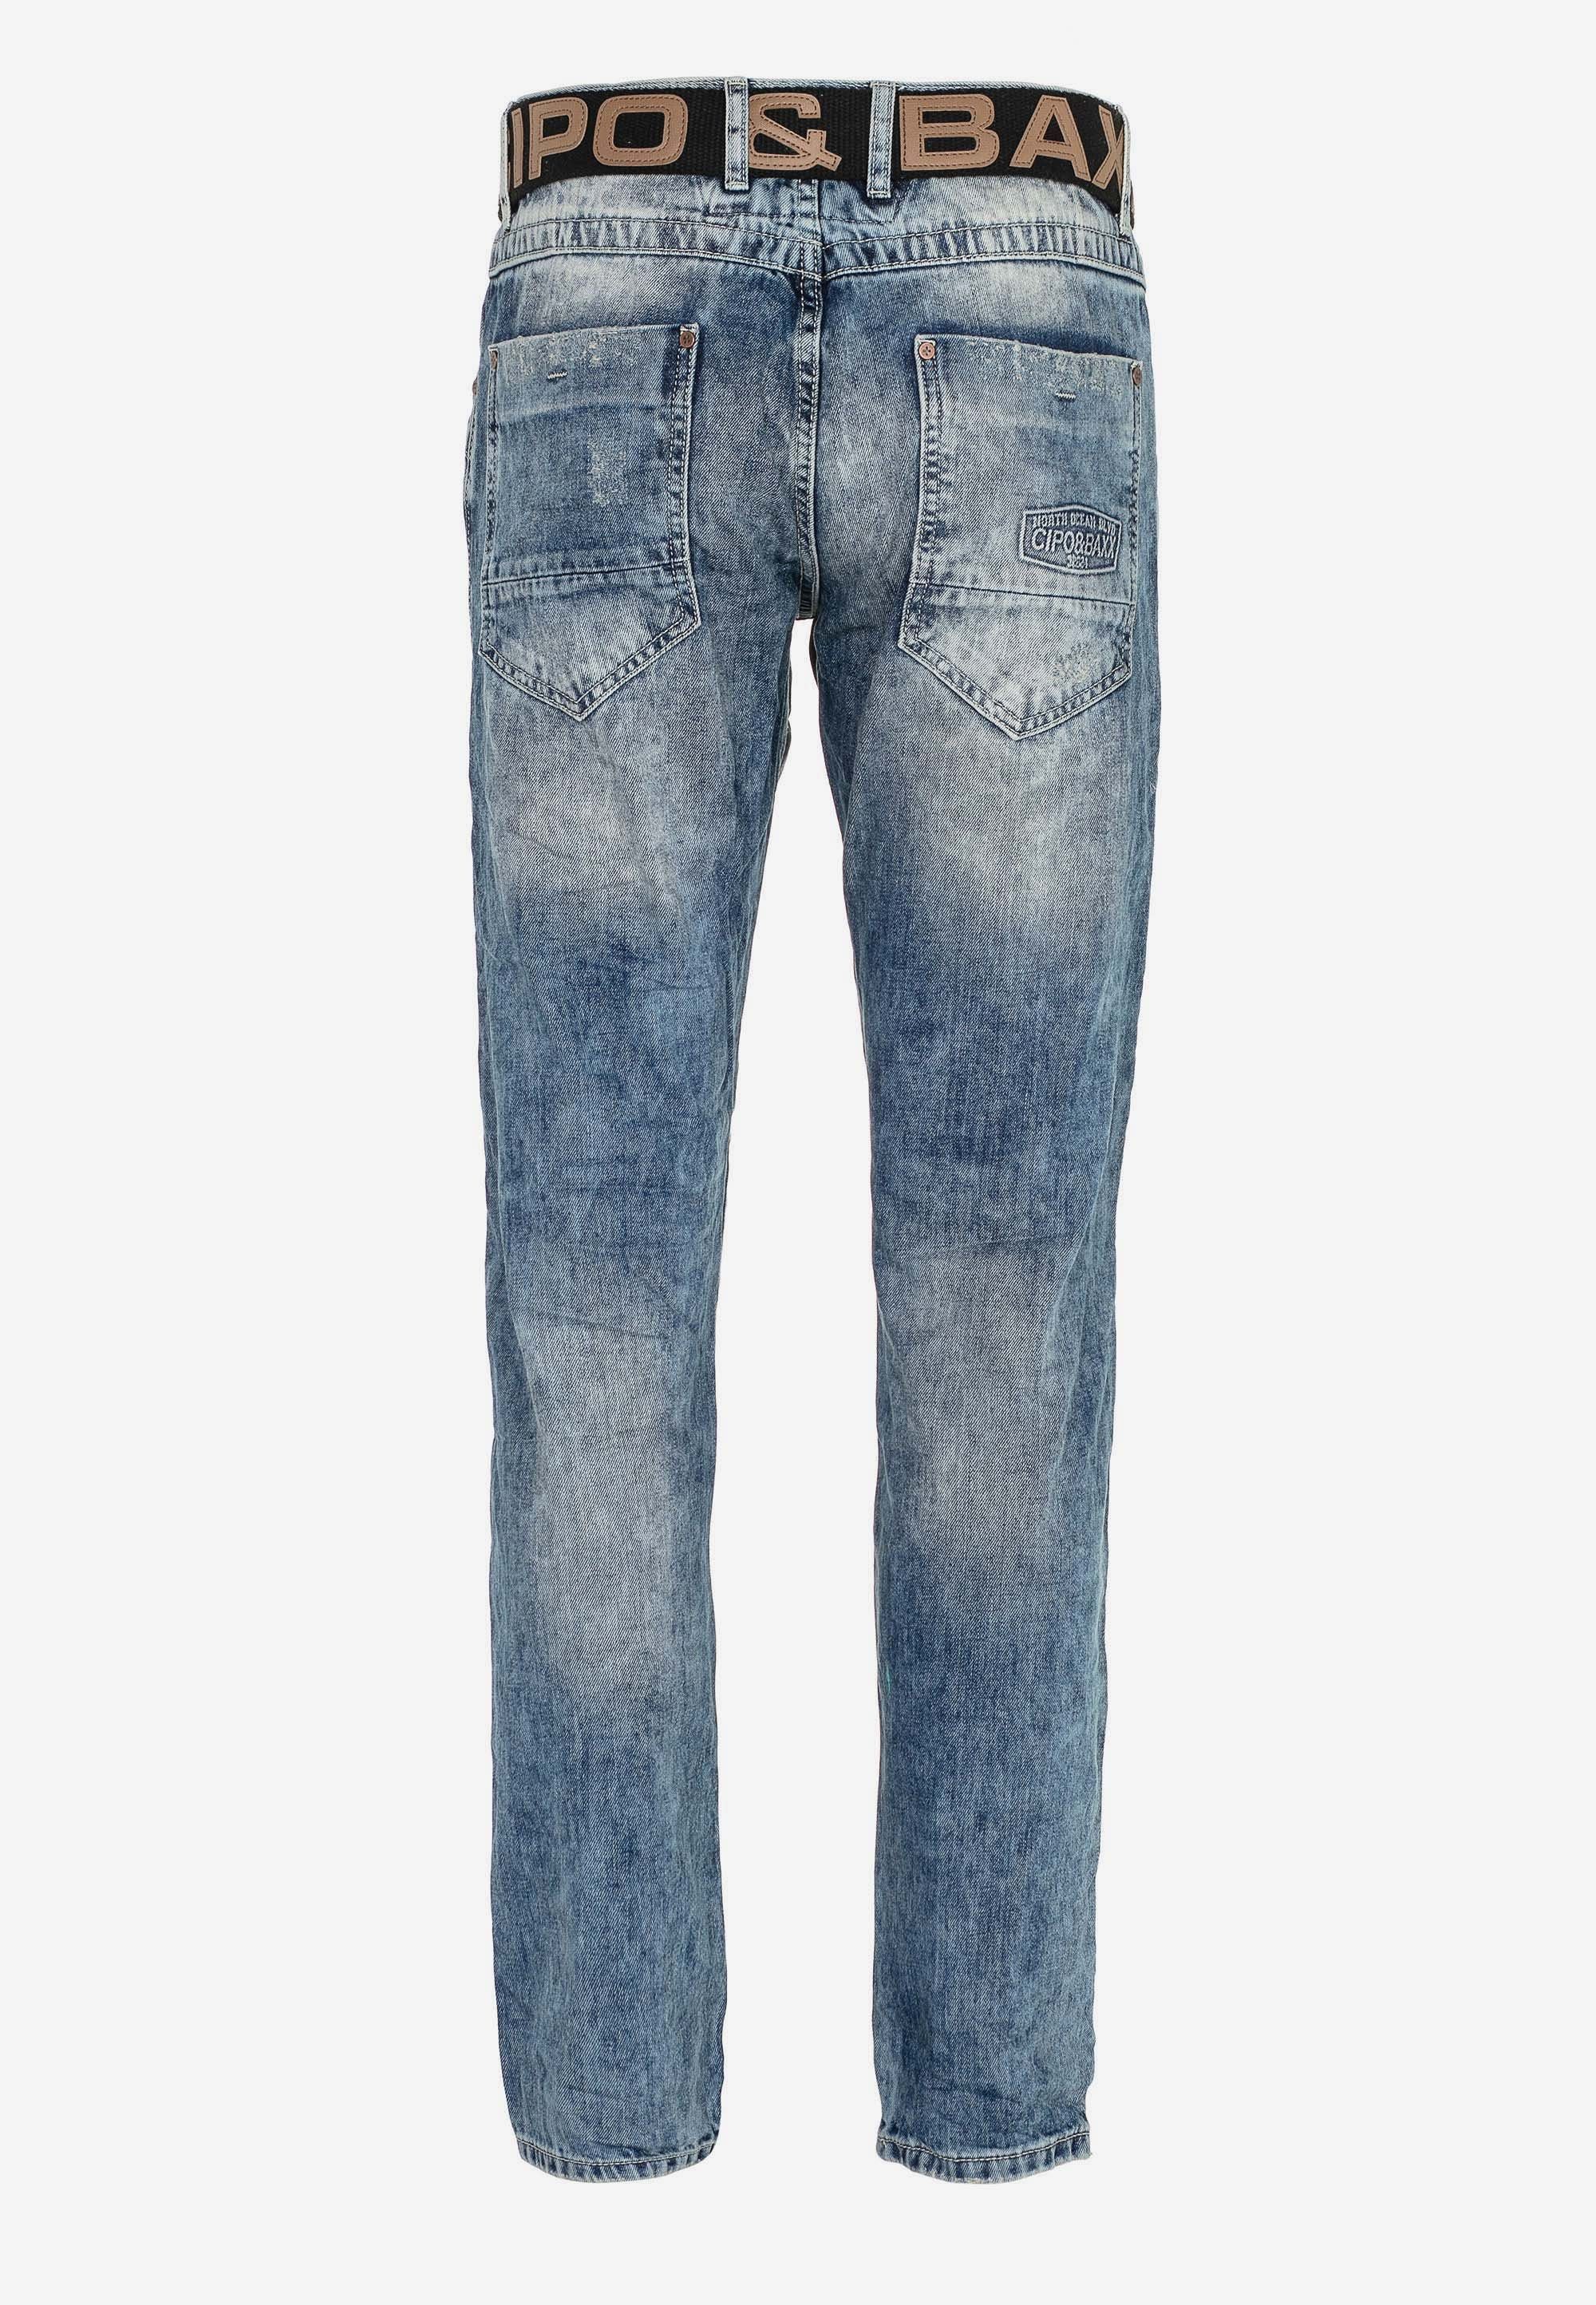 Ripped Baxx Details & mit in Cipo Straight-Fit Bequeme Jeans